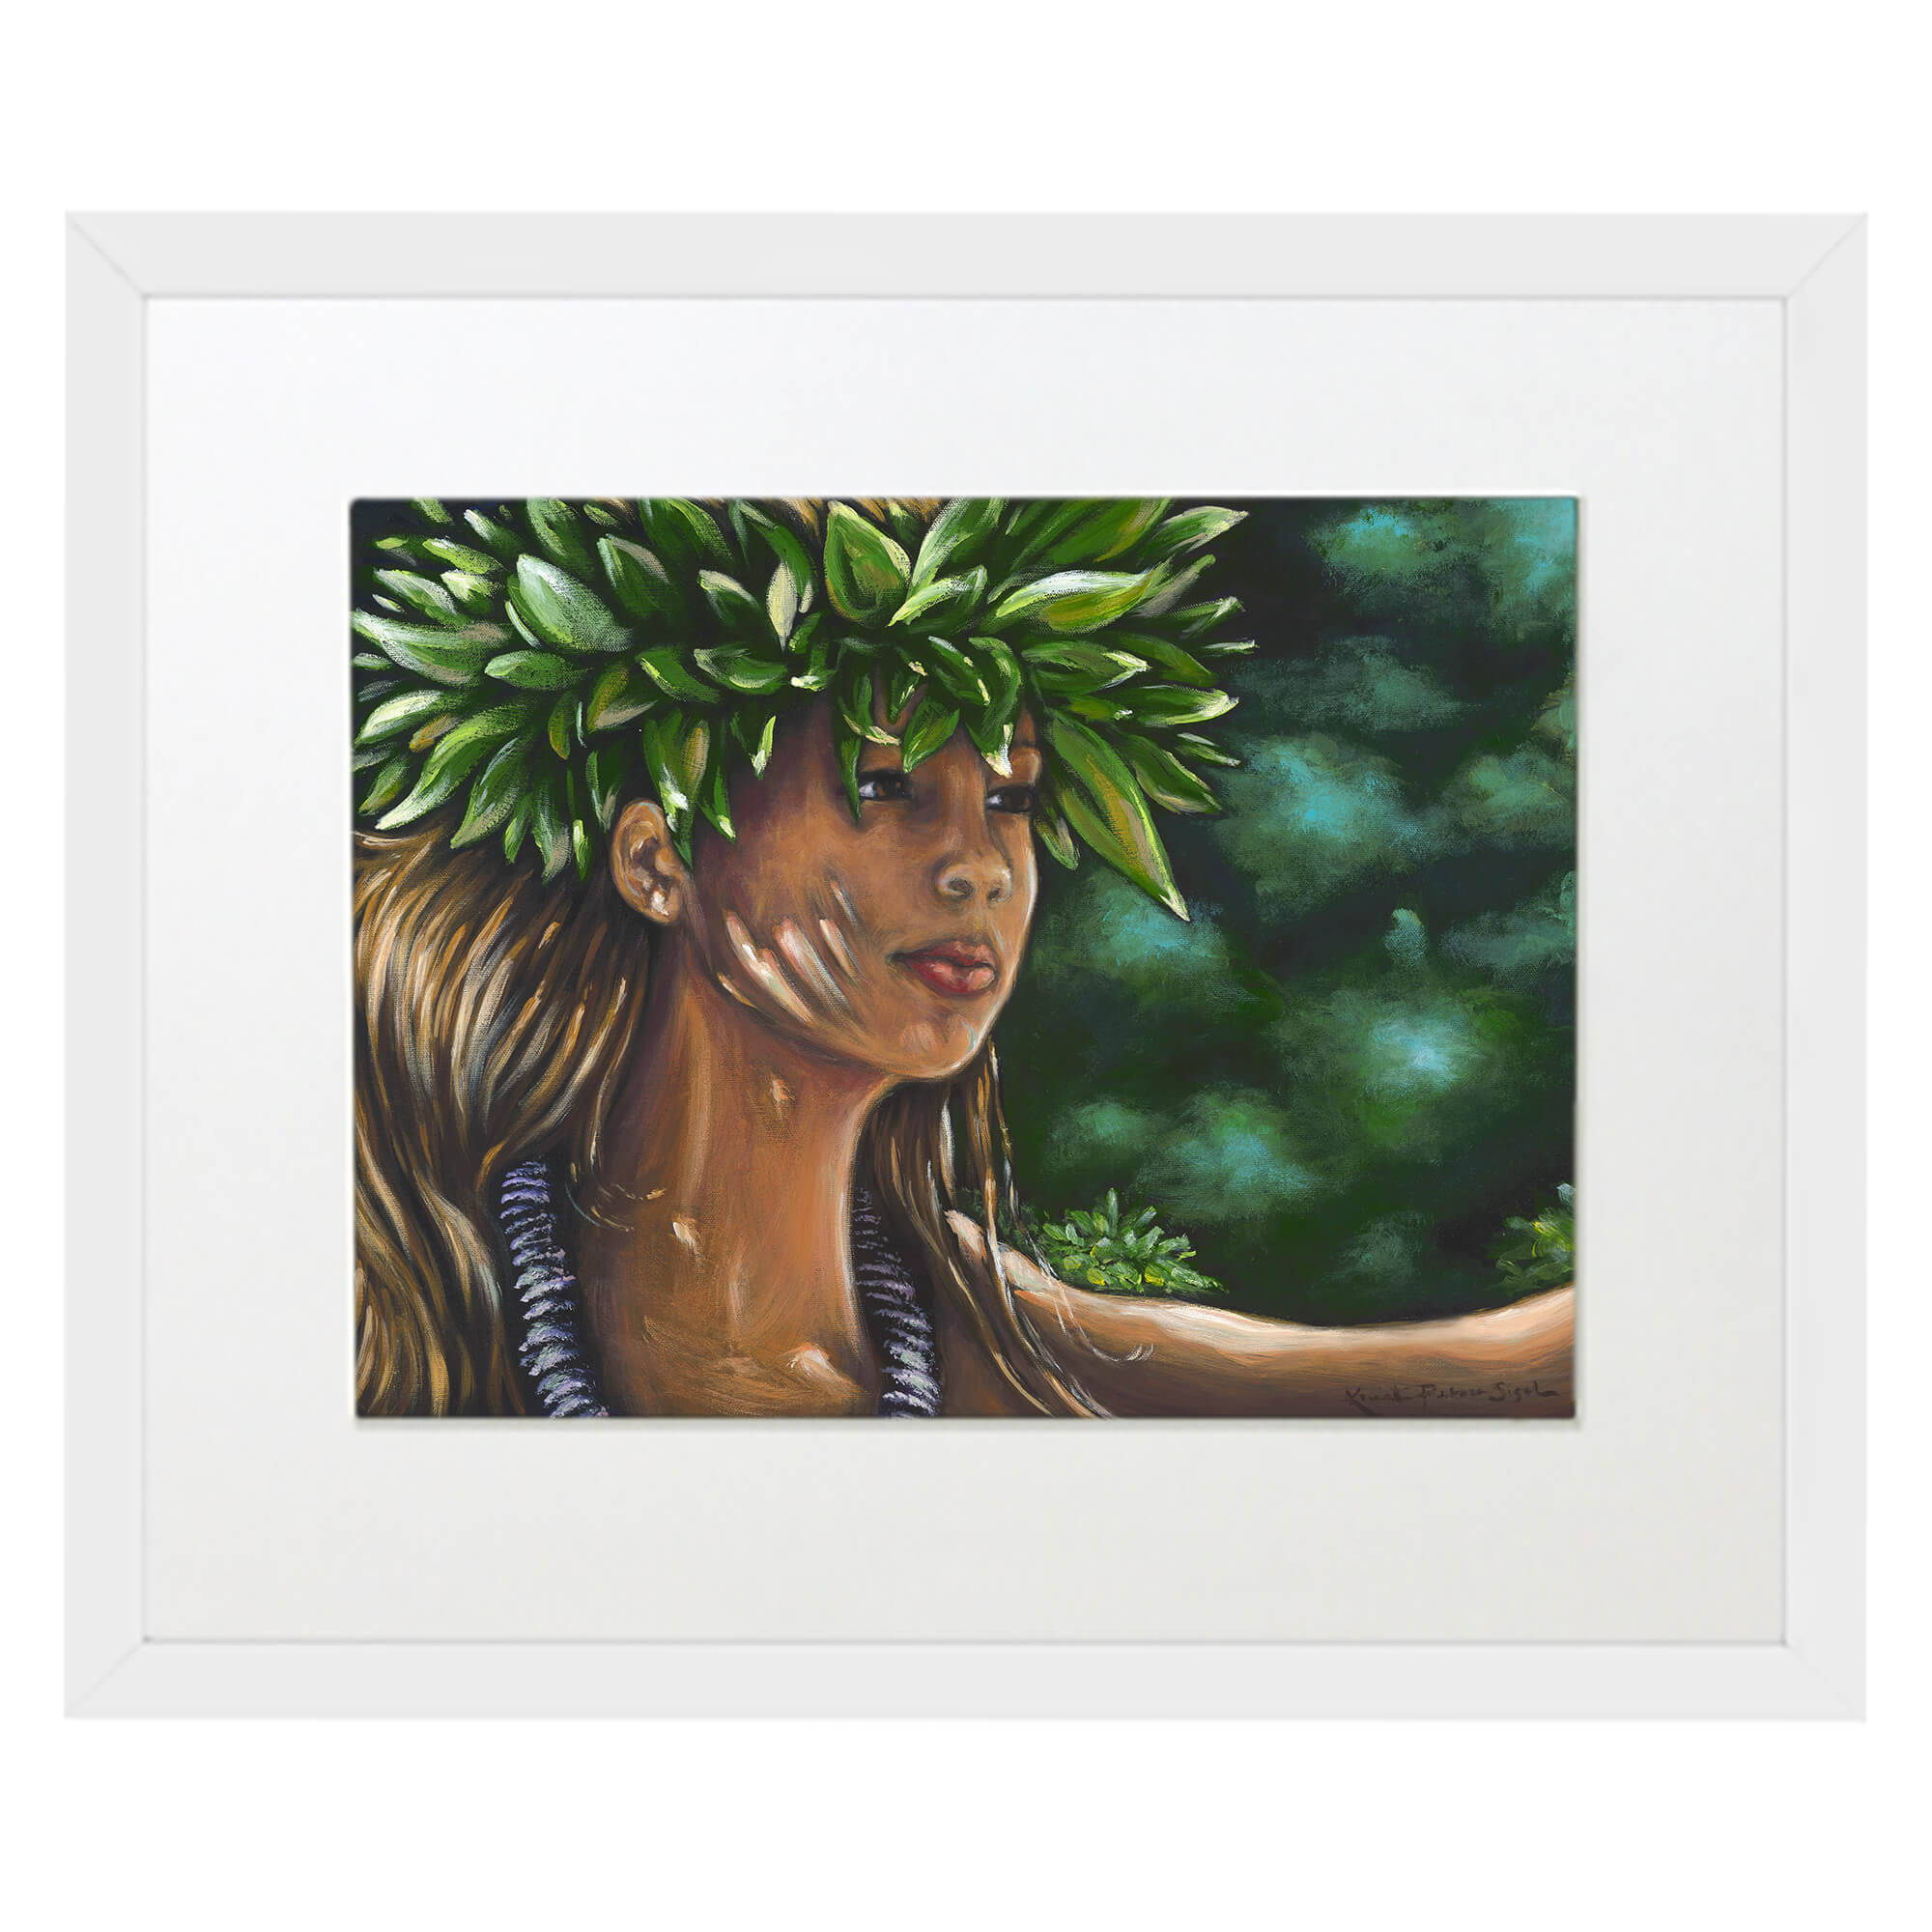 Matted art print with white frame featuring  a white necklace  by hawaii artist Kristi Petosa